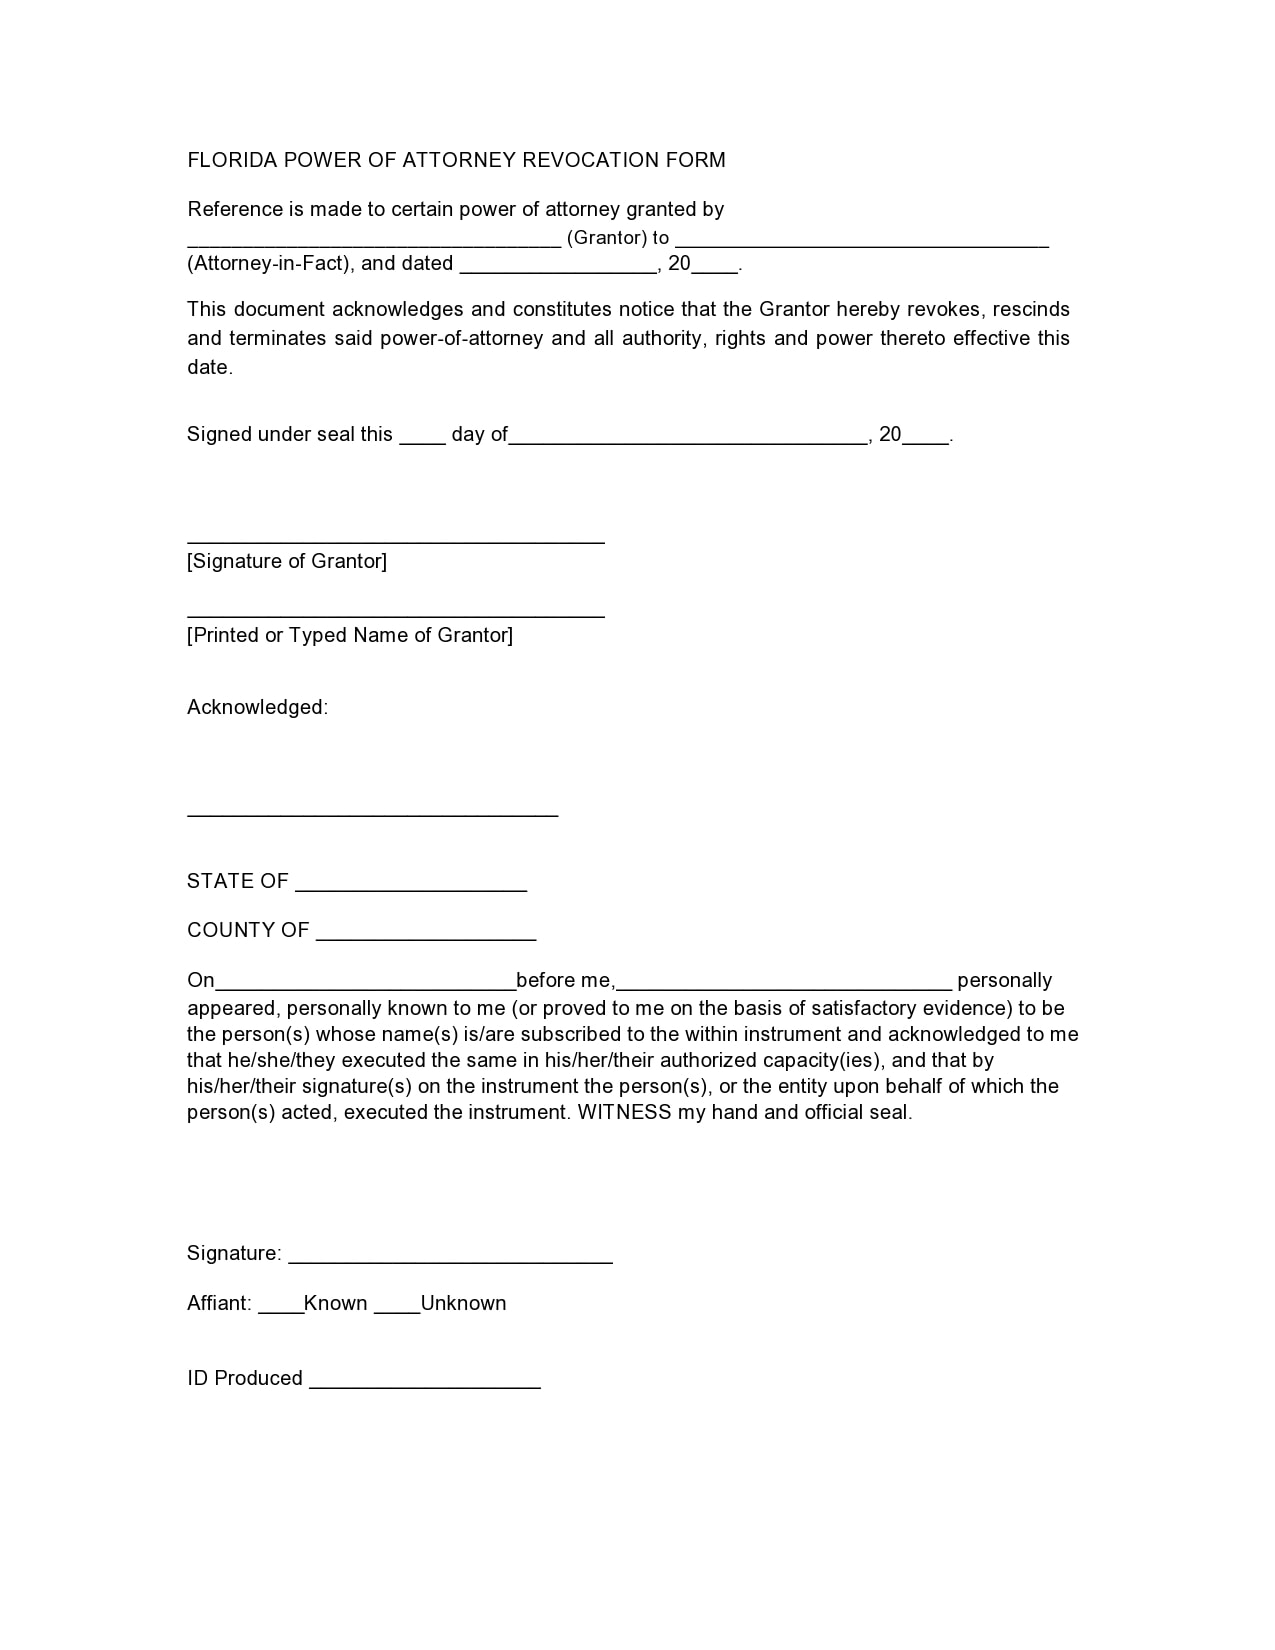 30 Free Power of Attorney Revocation Forms (Word/PDF) - TemplateArchive